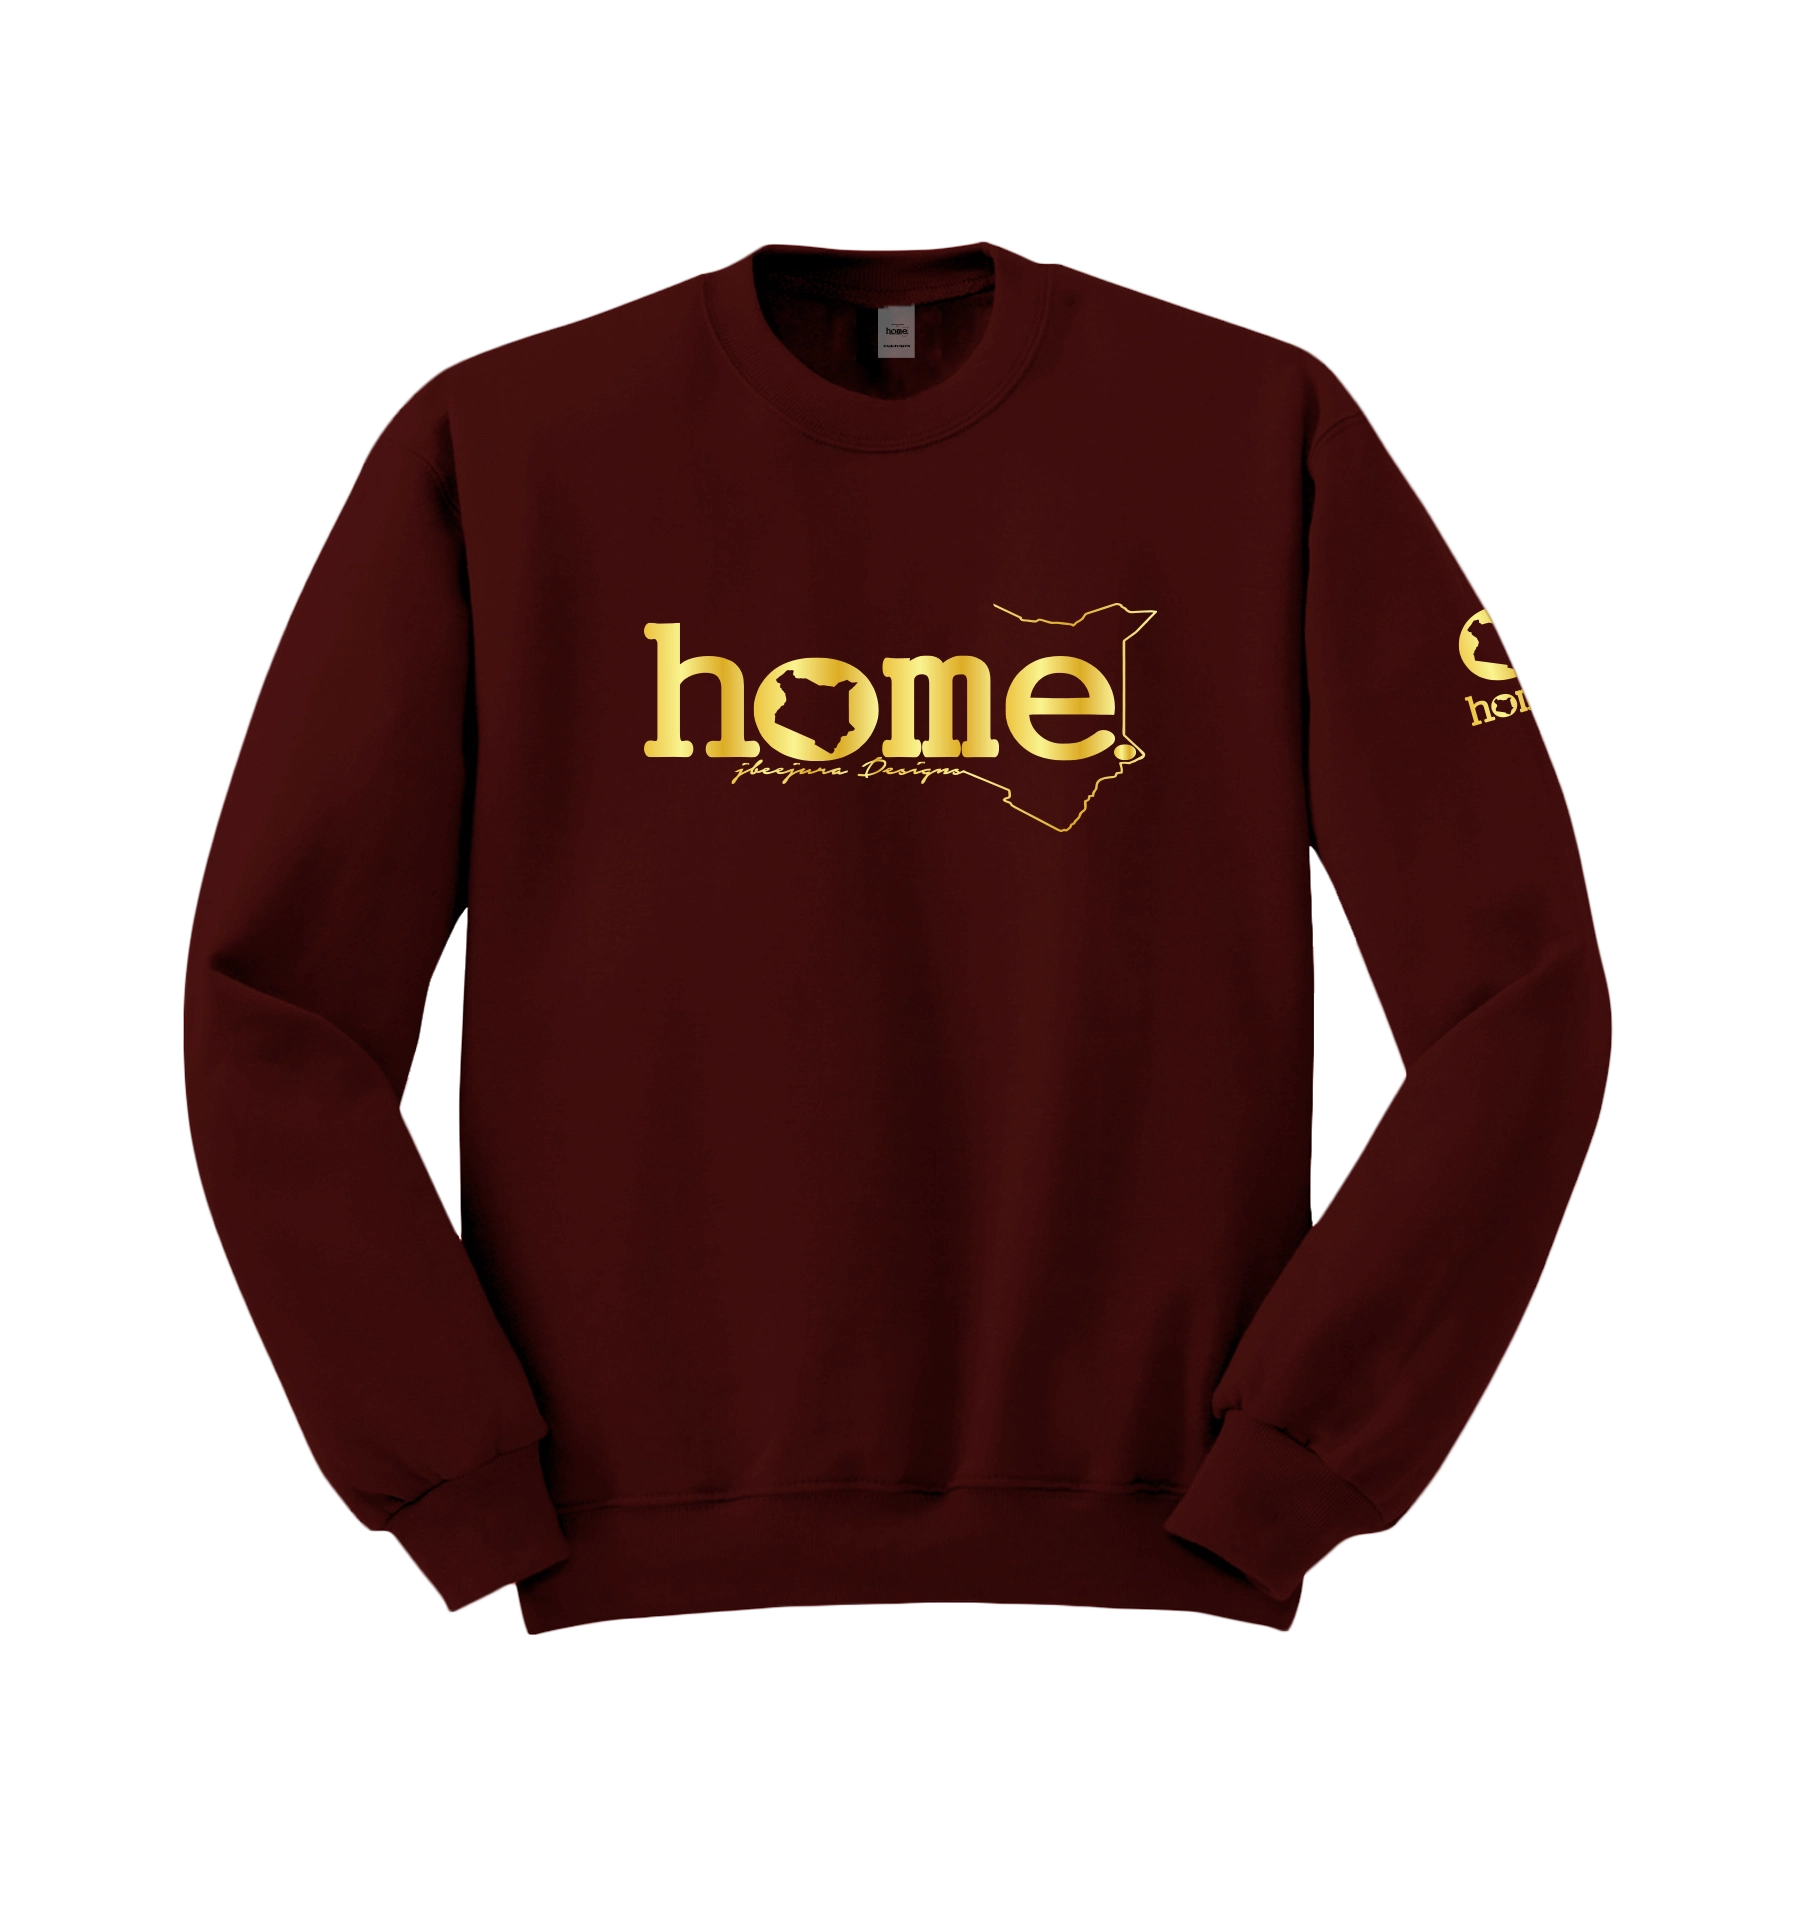 home_254 MAROON SWEATSHIRT (MID-HEAVY FABRIC) WITH A GOLD WORDS PRINT